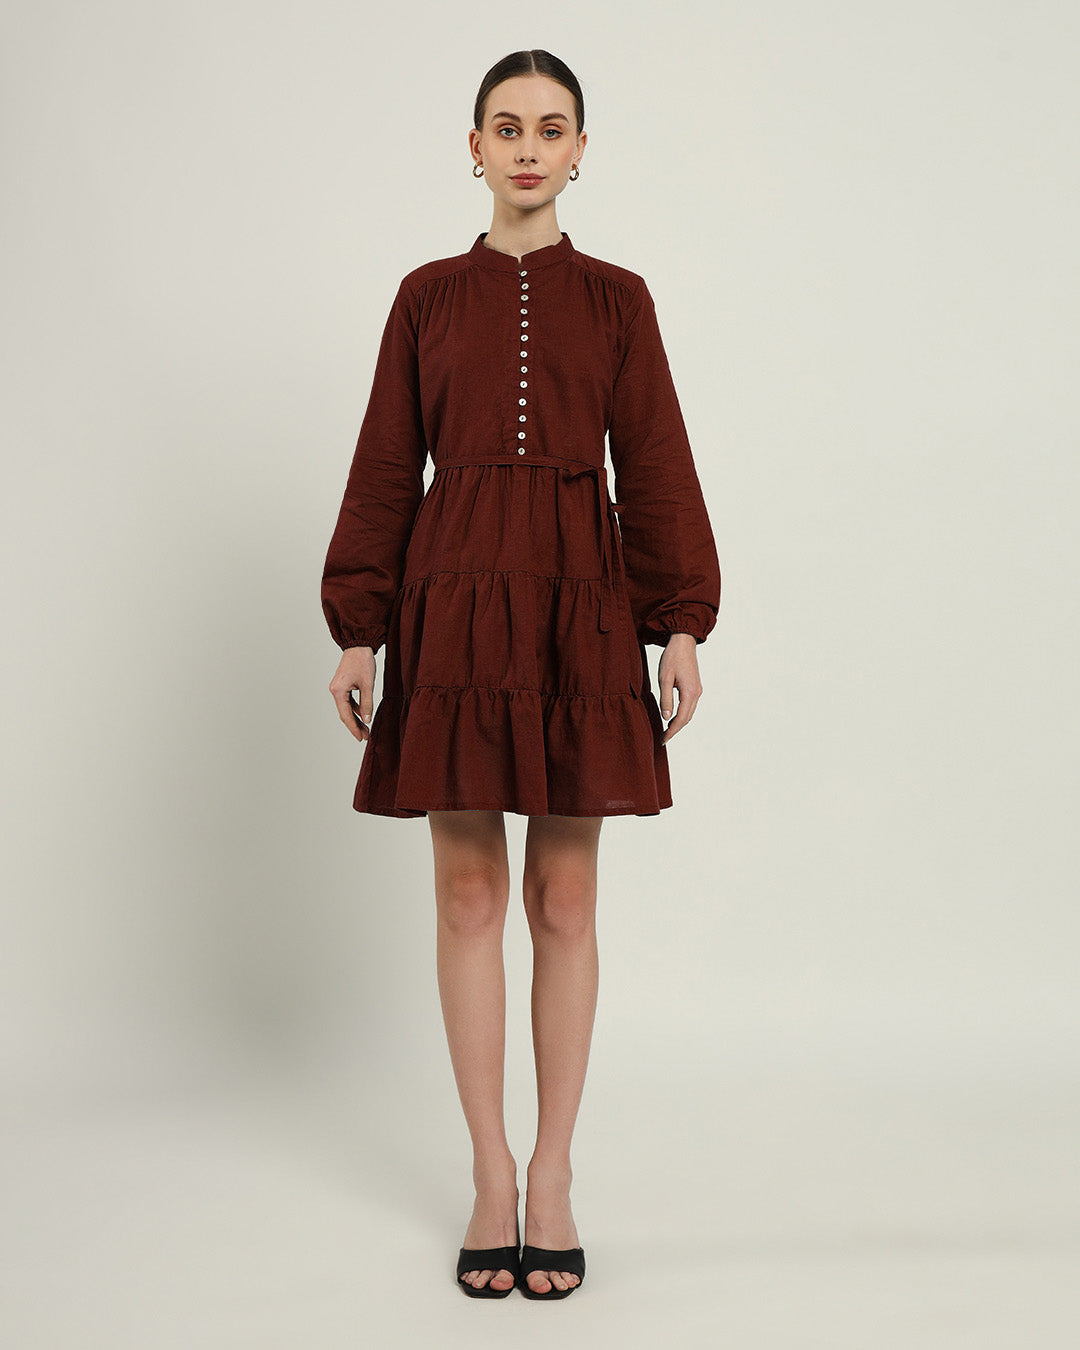 The Ely Rouge Cotton Dress